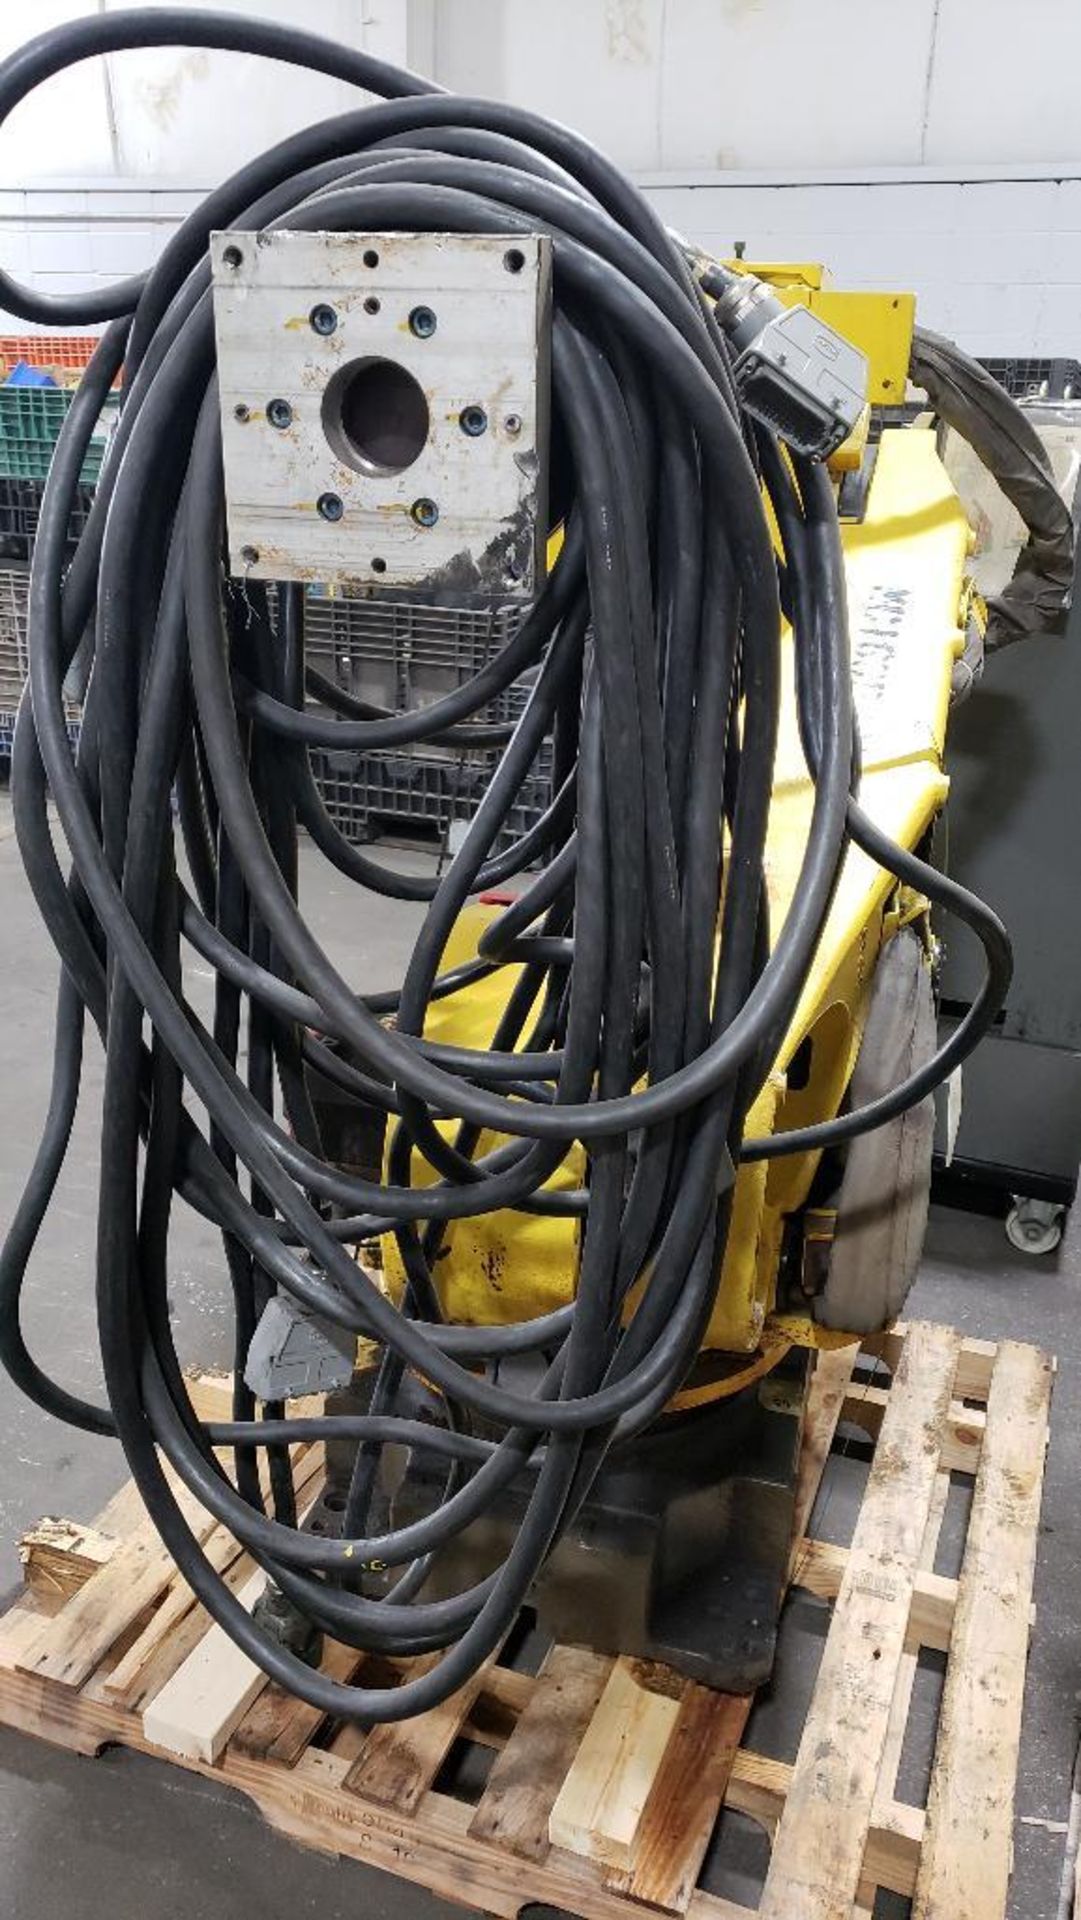 Fanuc R-2000iA/200F robot with Fanuc System R-J3iB controller. - Image 7 of 16